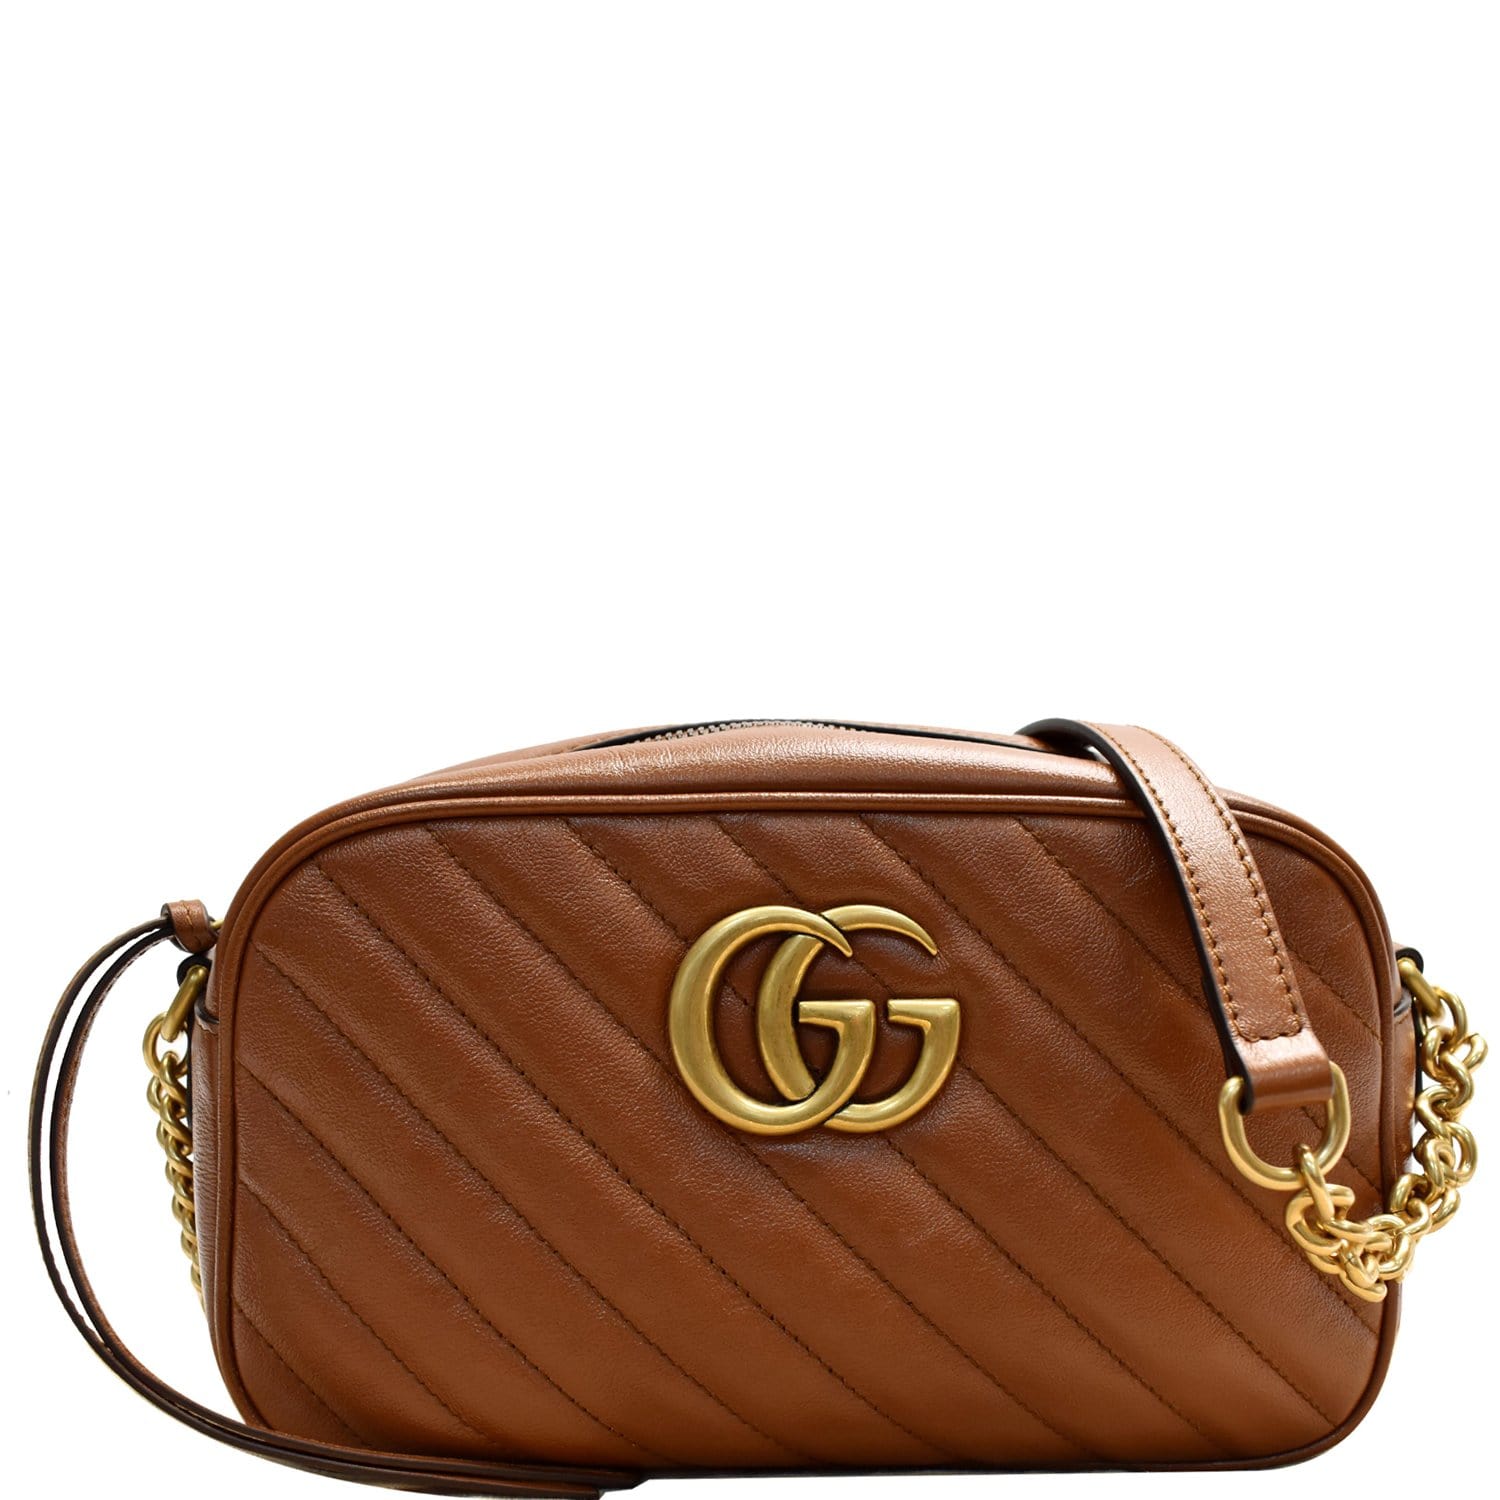 Gucci GG Marmont Matelasse Small Leather Shoulder Bag